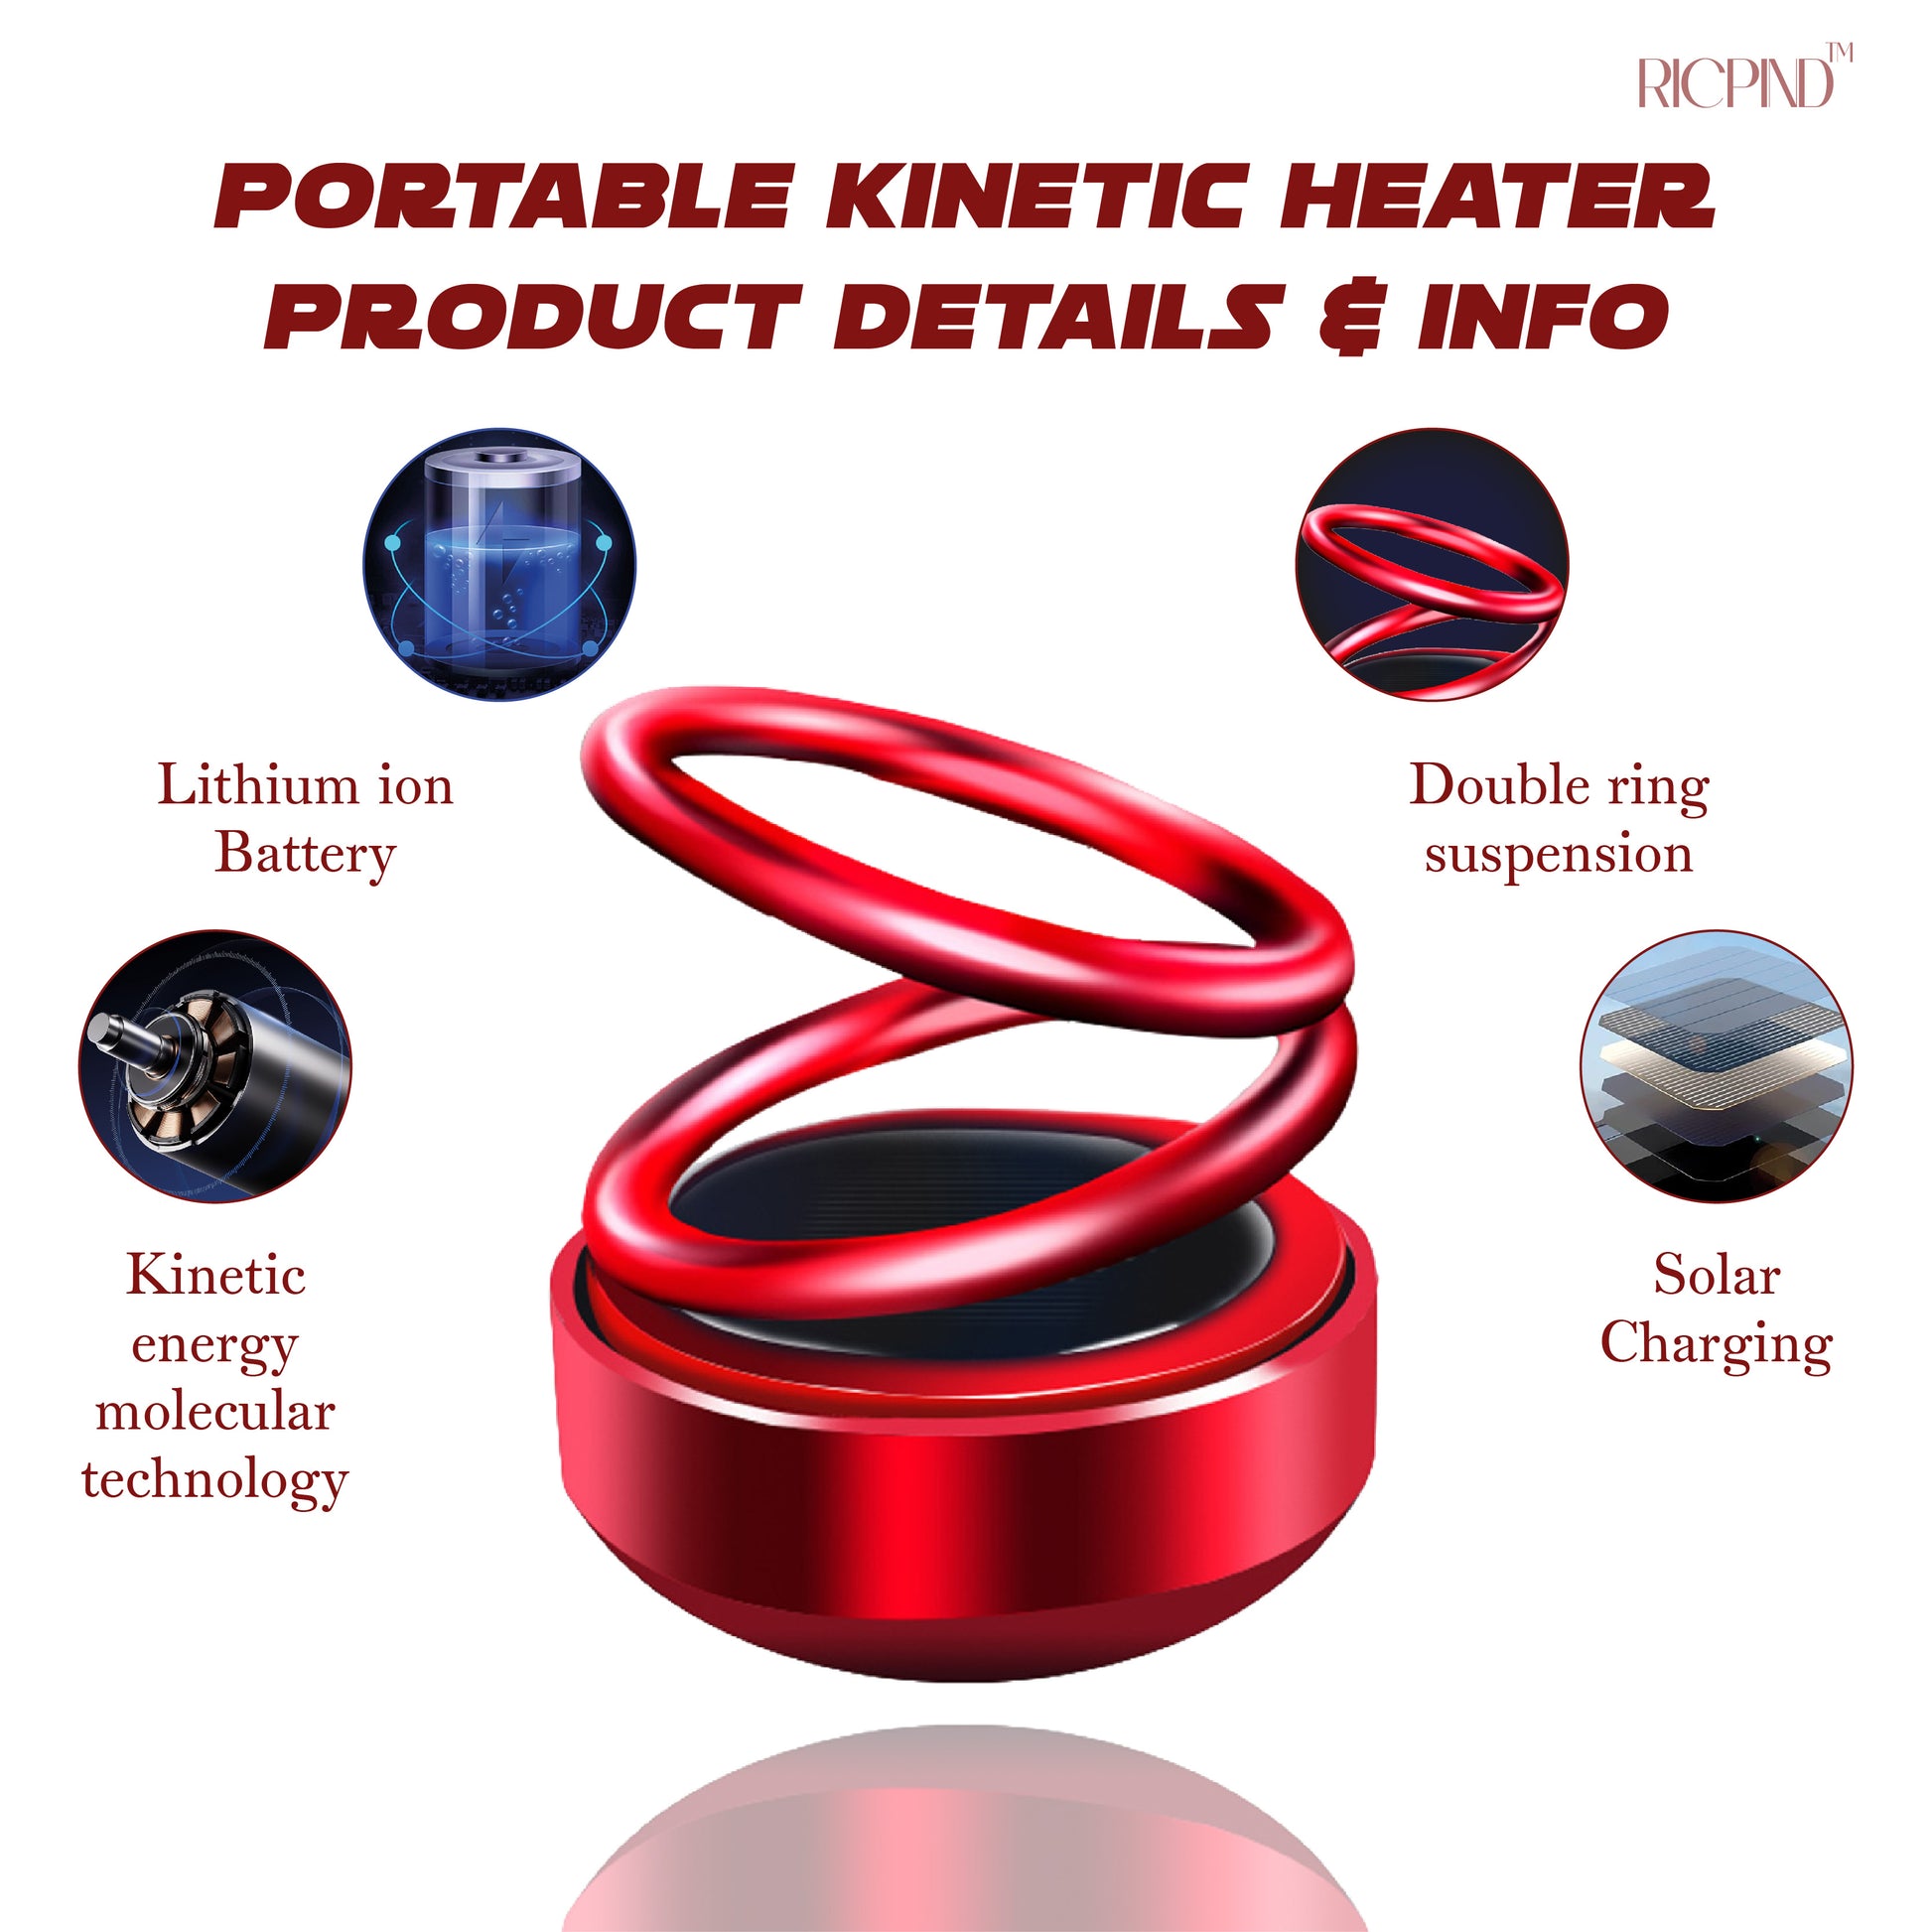 Mini Portable Kinetic Heater, Does It Really Work